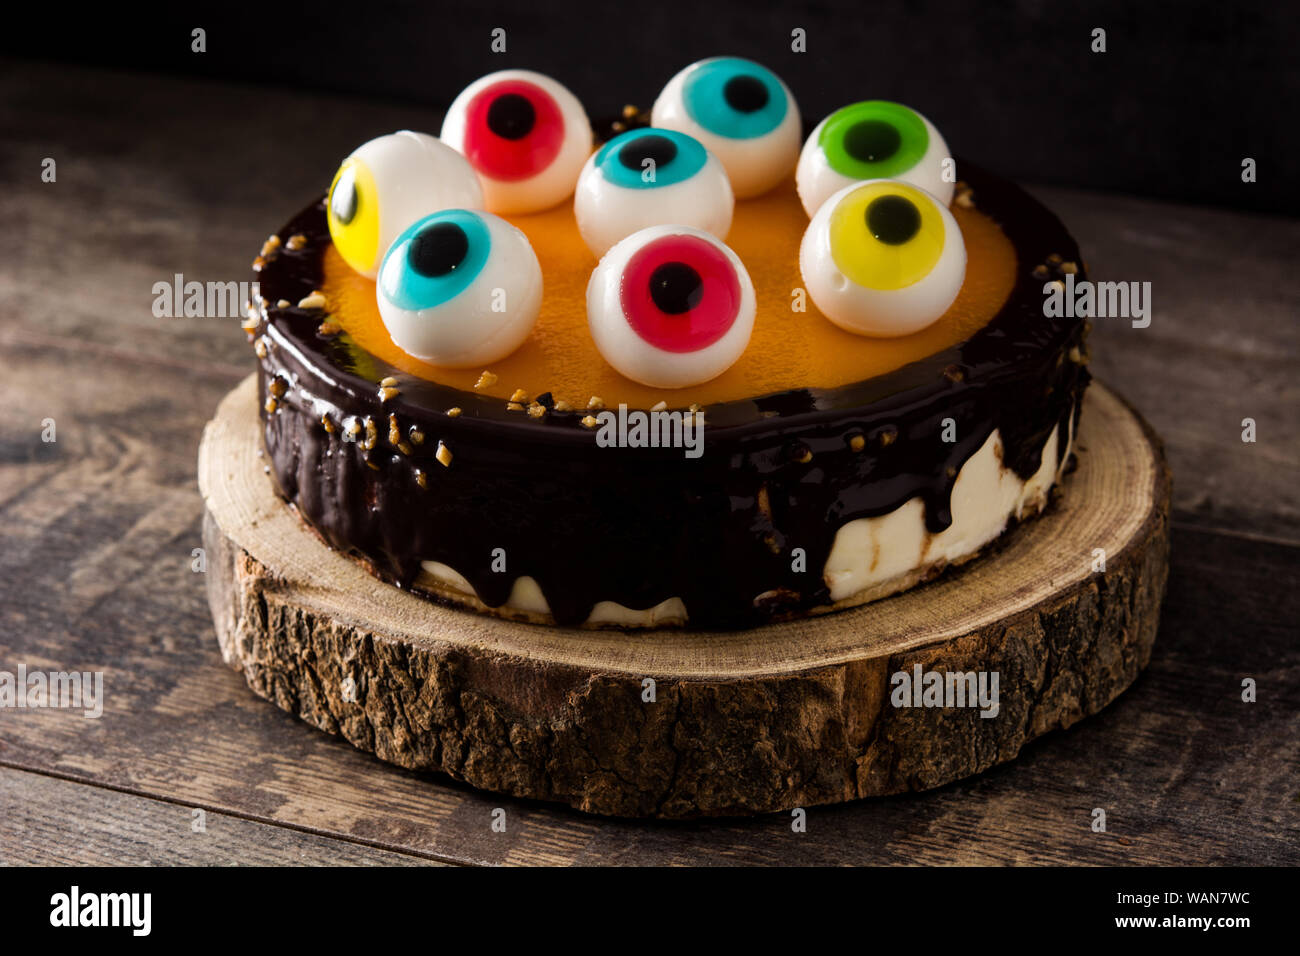 Halloween cake with candy eyes decoration on wooden table Stock ...